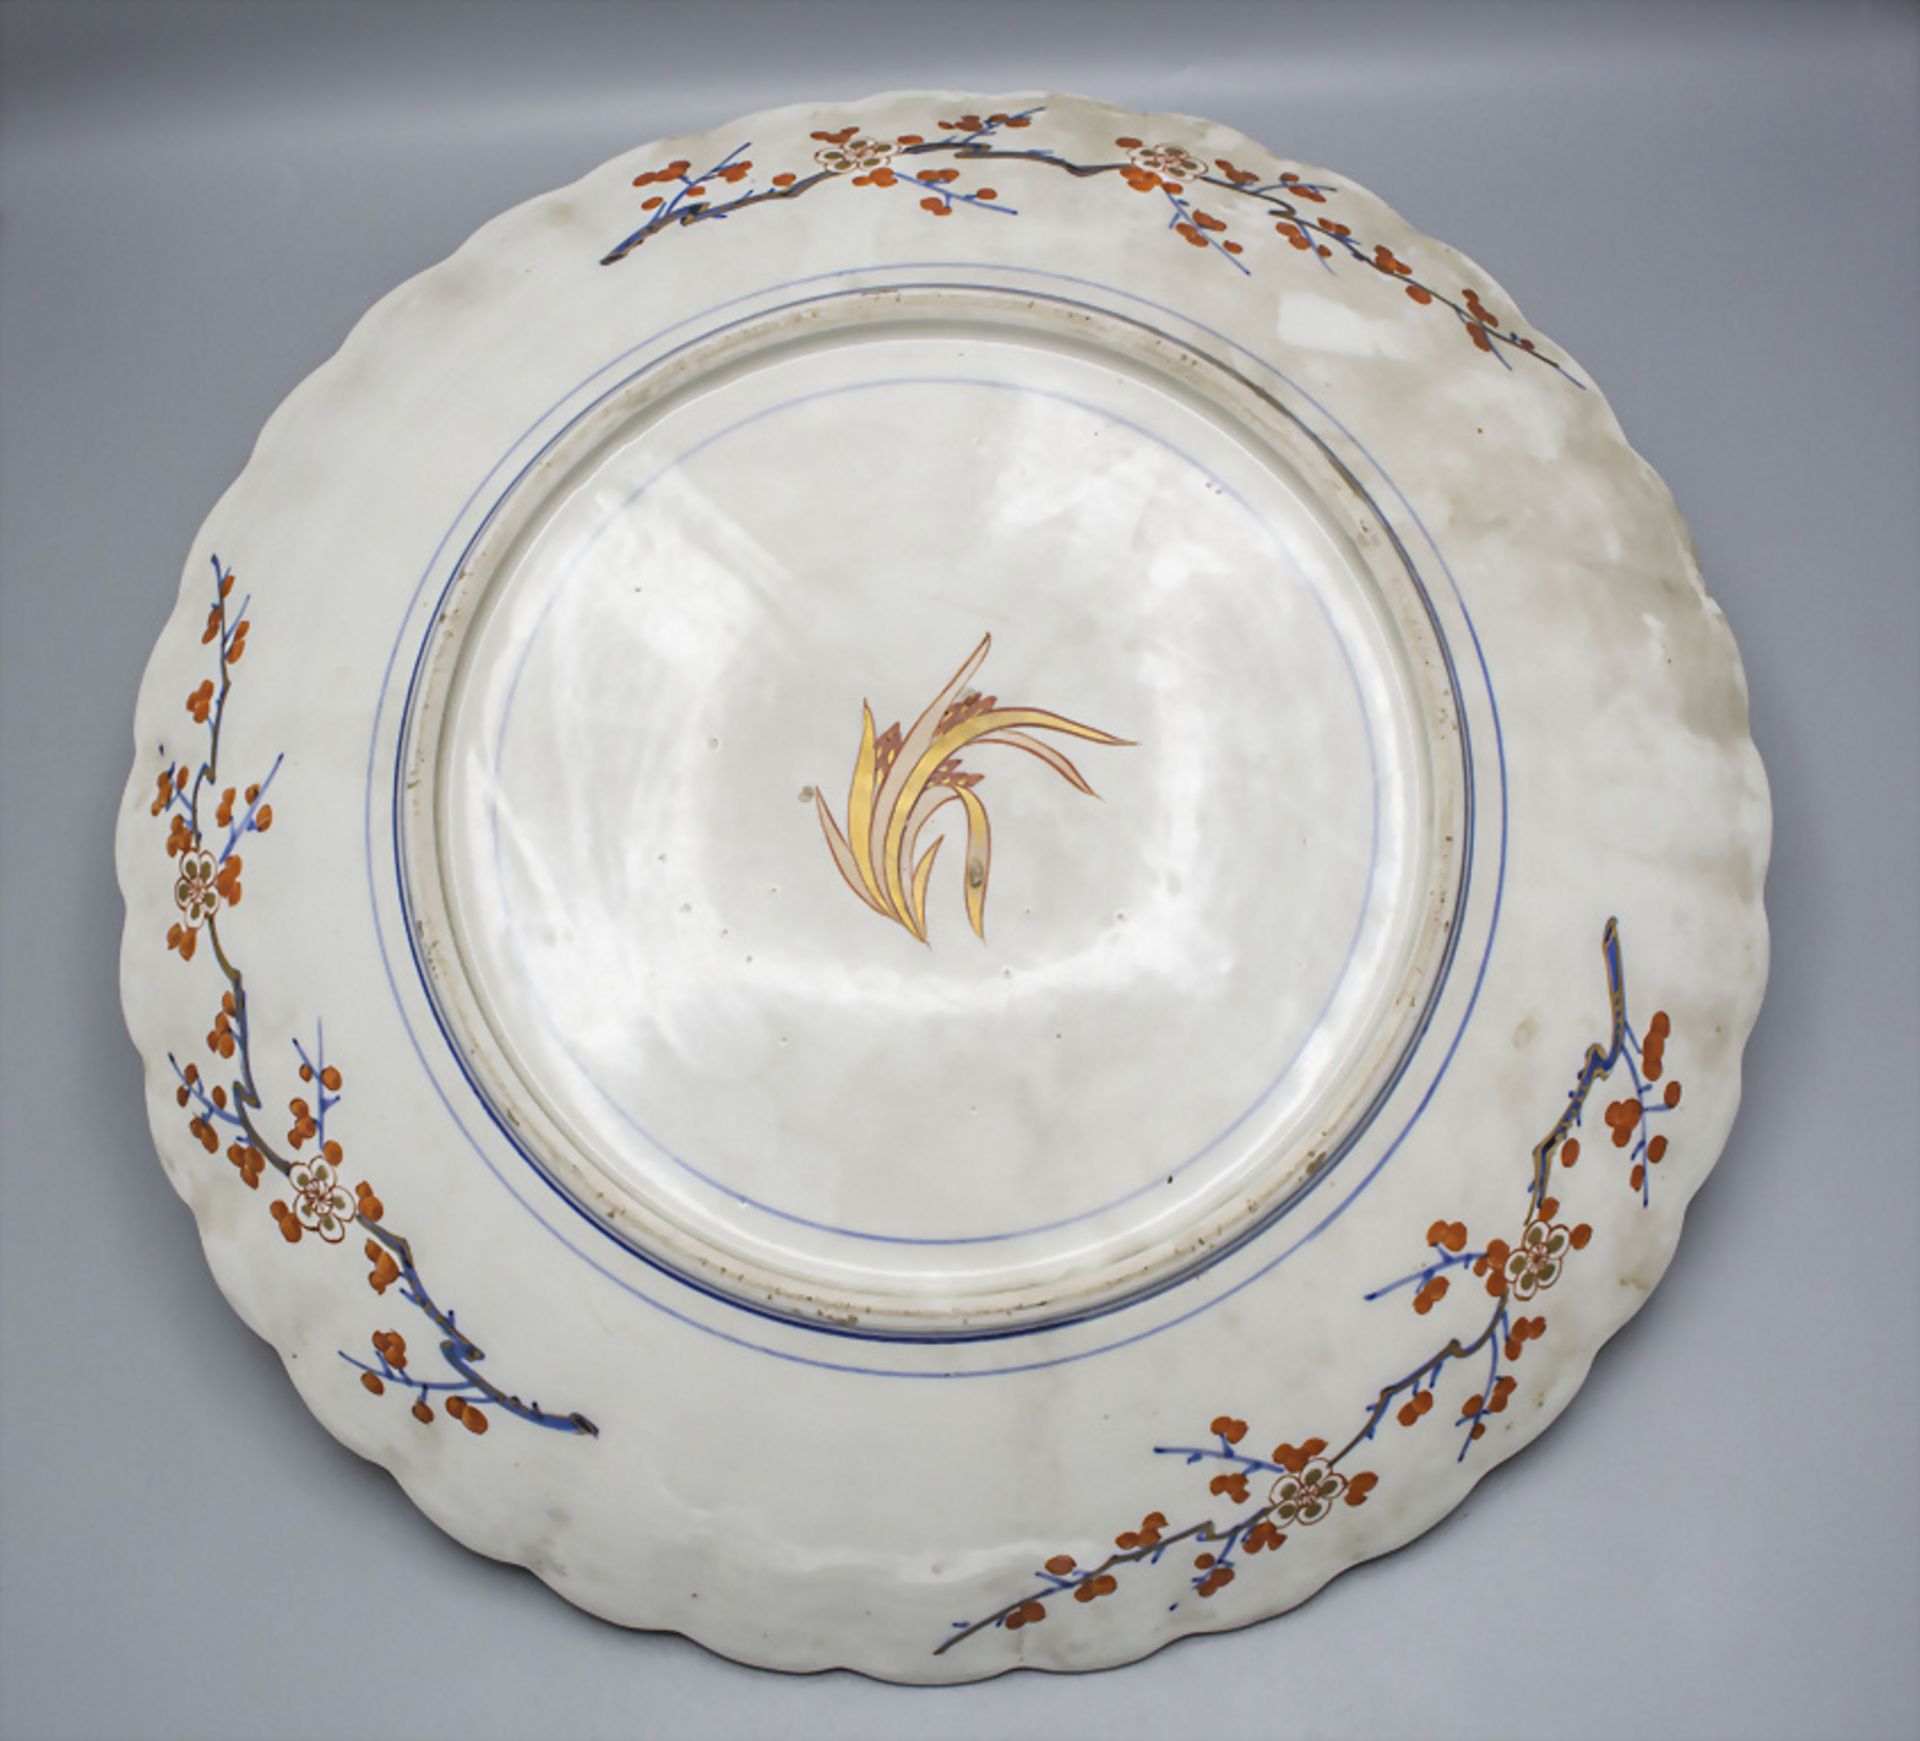 Großer Teller / A large plate, wohl Famille Rose, wohl China, 18. Jh. - Bild 3 aus 4